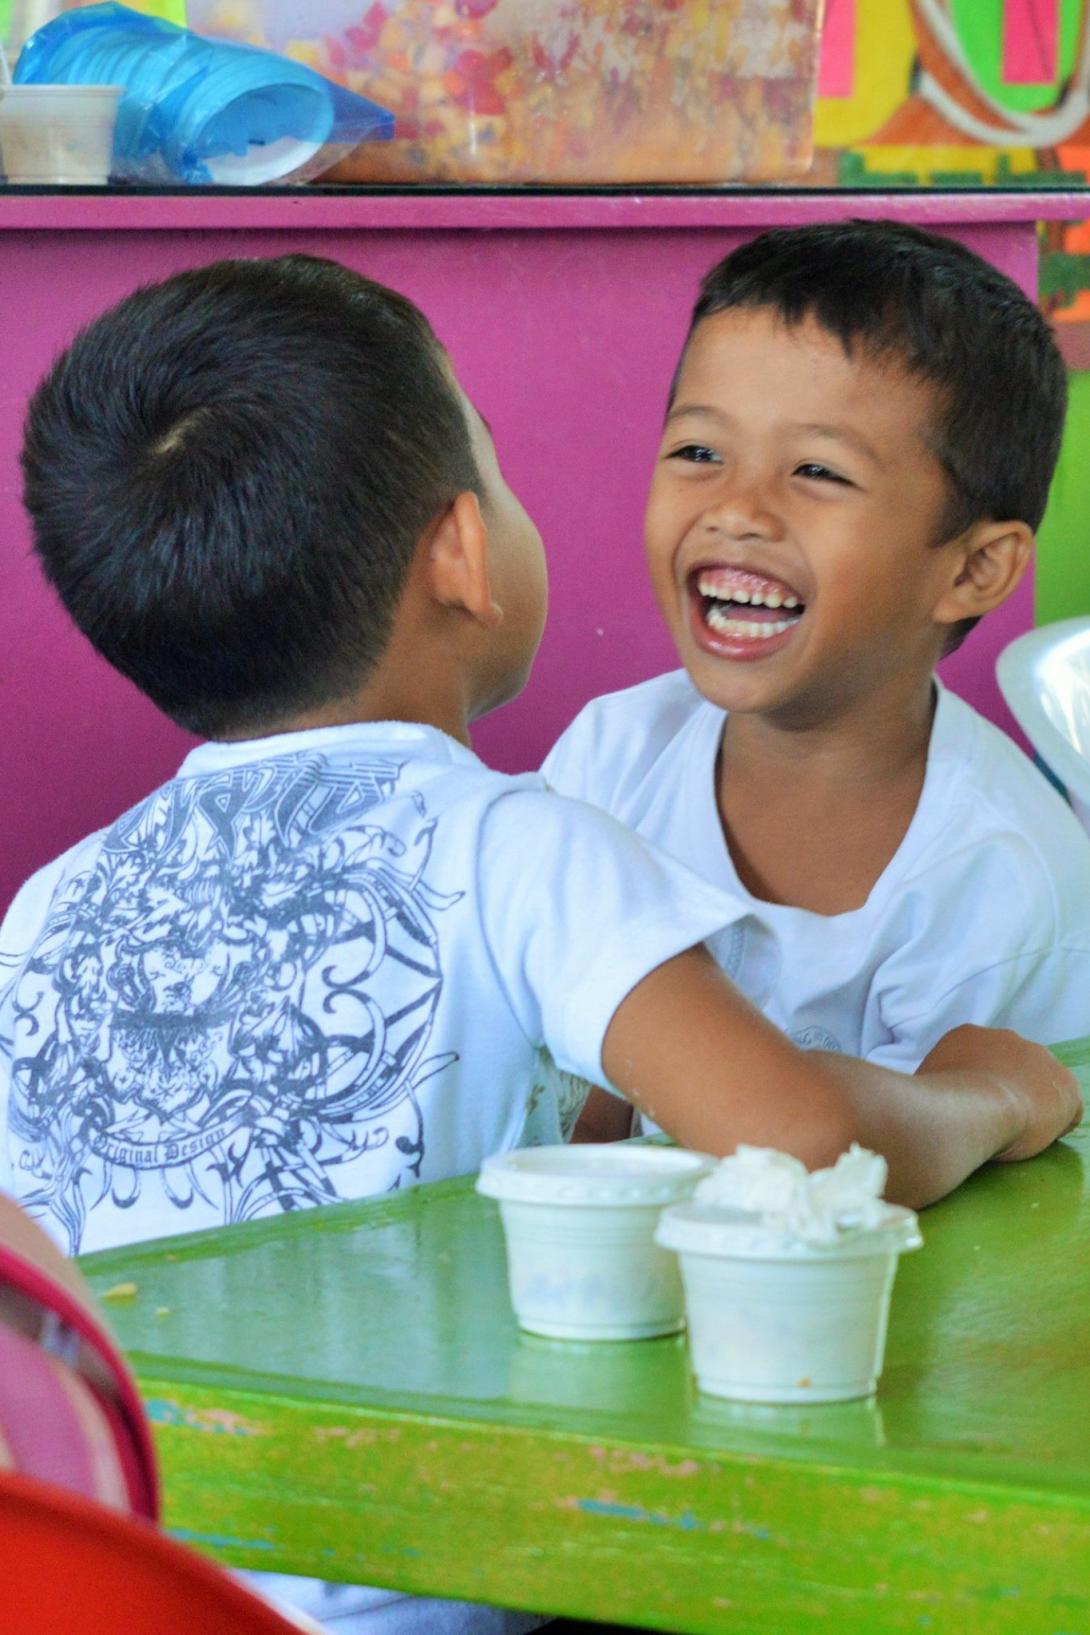 Children in Philippines smiling at each other